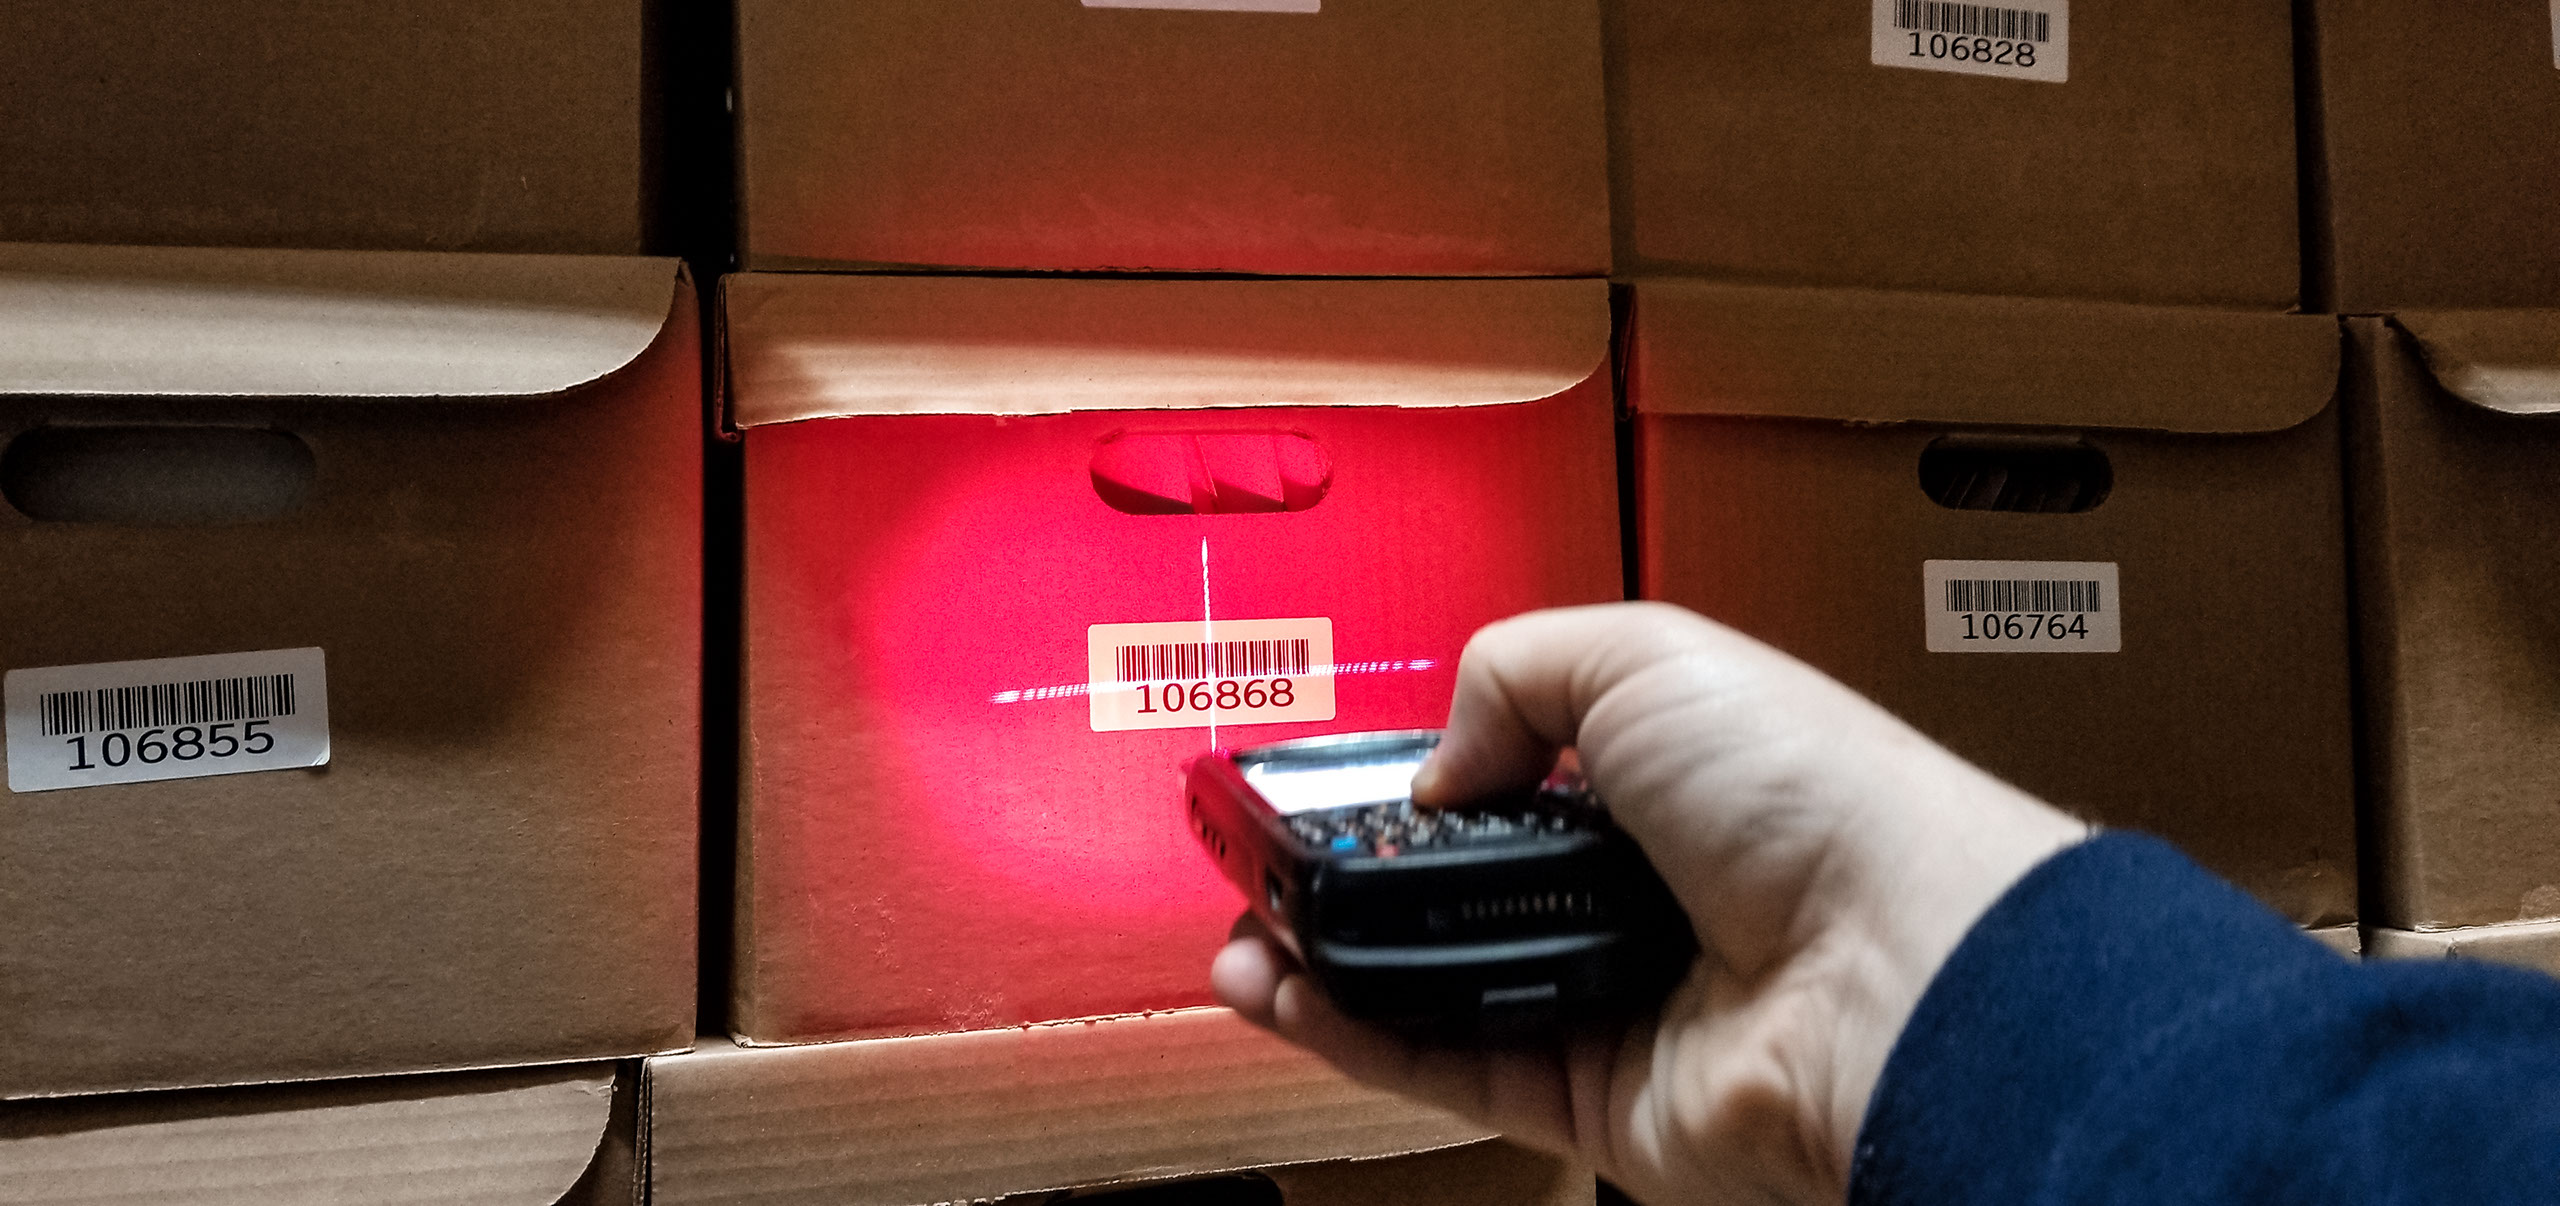 Image of Warehouse Scanner